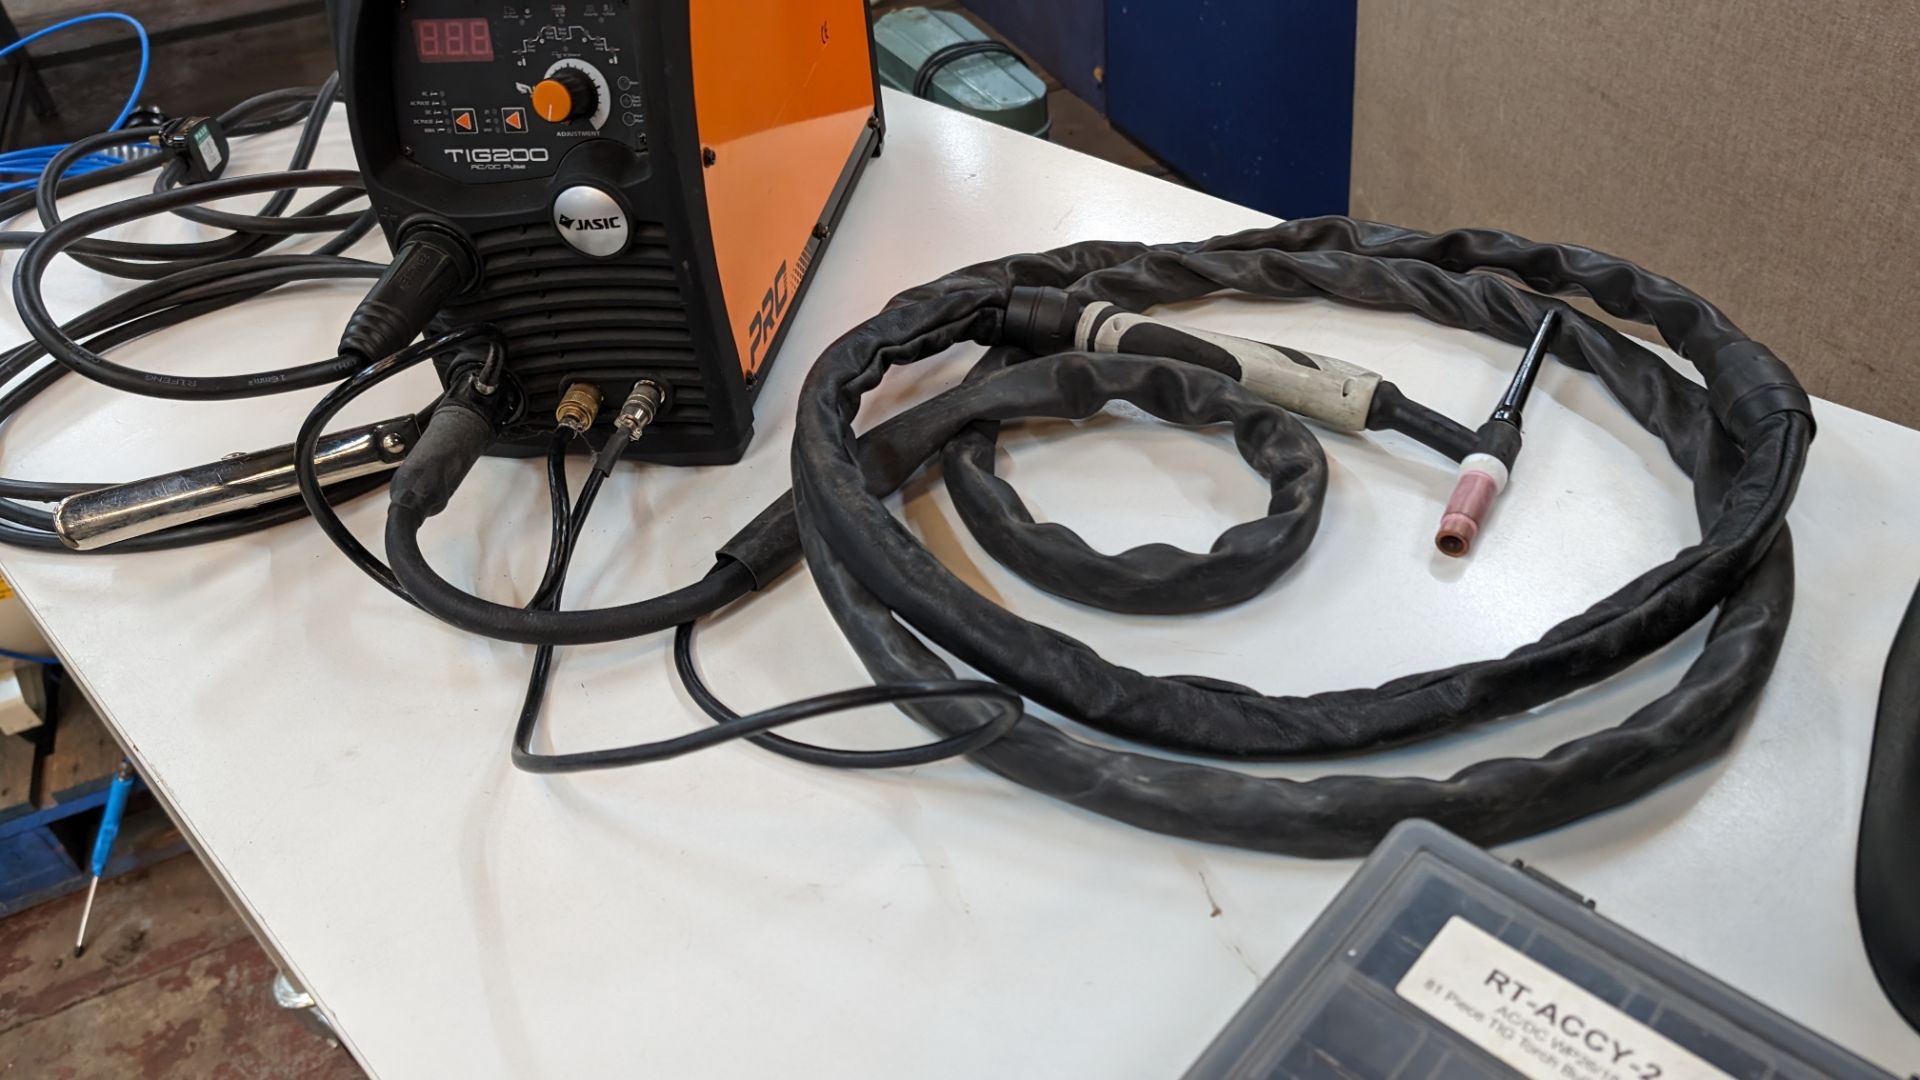 Jasic Pro tig 200 AC/DC pulse welder, including welding mask, box of consumables & other items as pi - Image 7 of 23